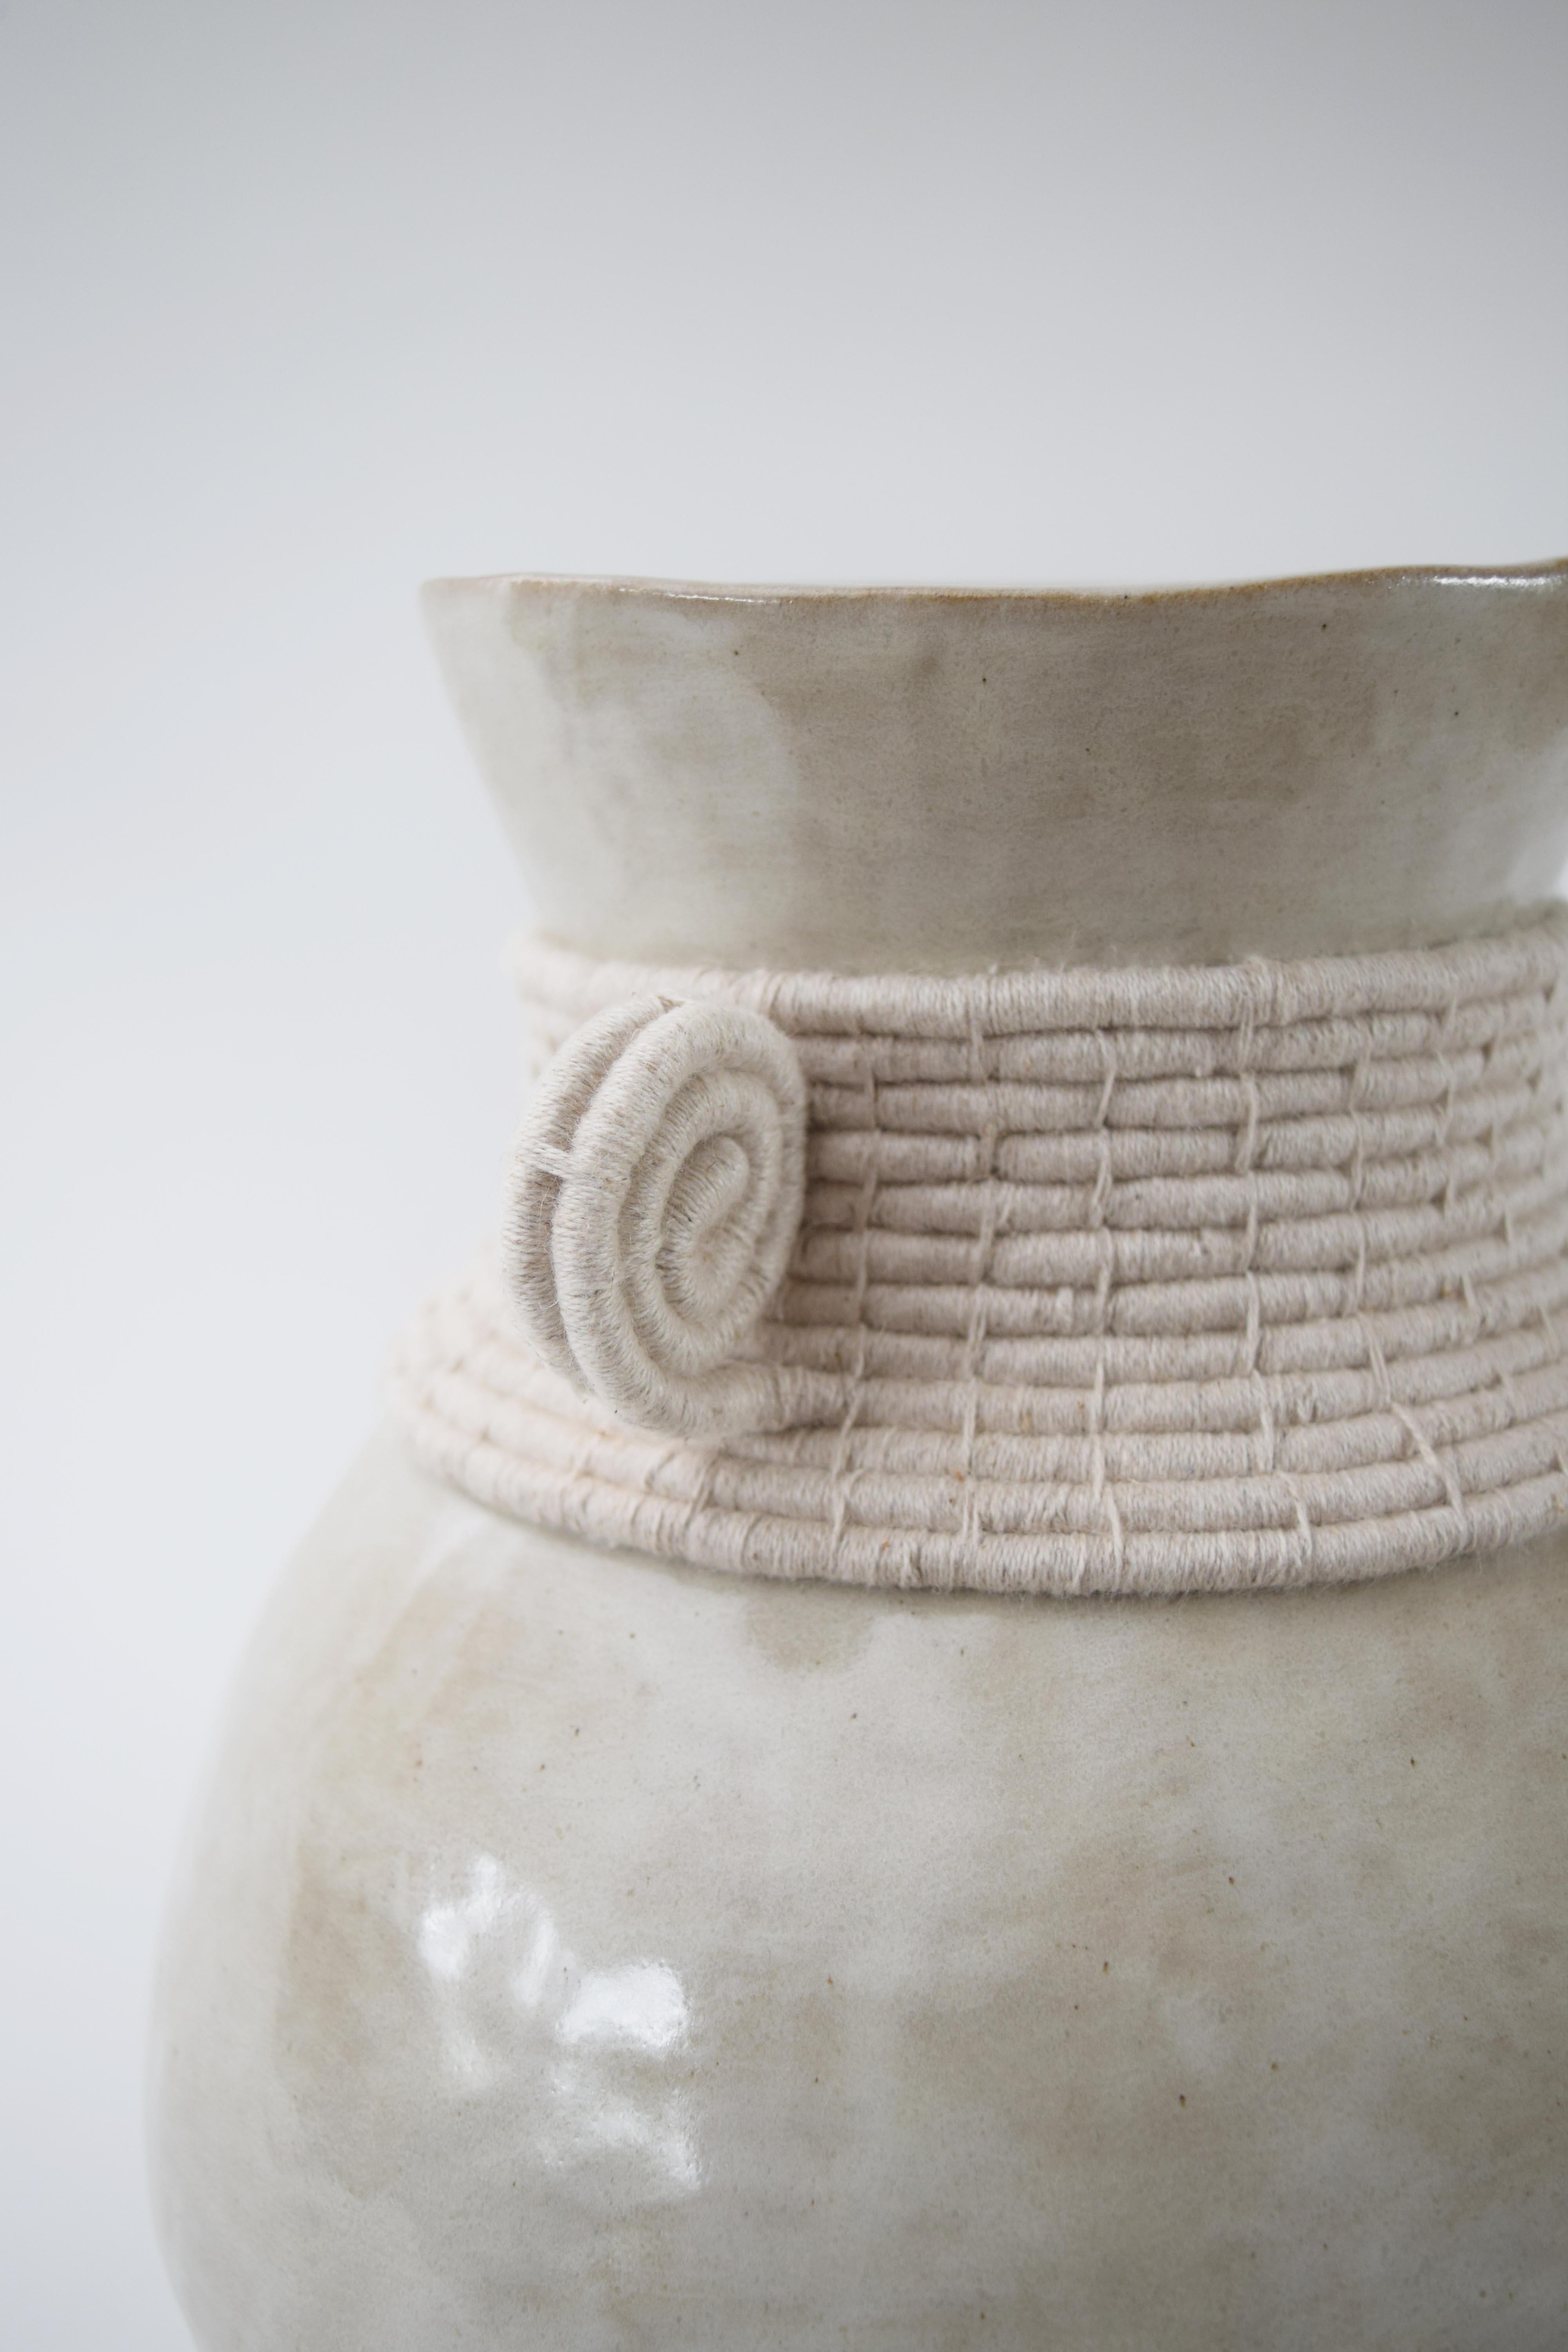 American One of a Kind Handmade Ceramic Vase #796 - Off White Glaze & Woven Cotton Detail For Sale